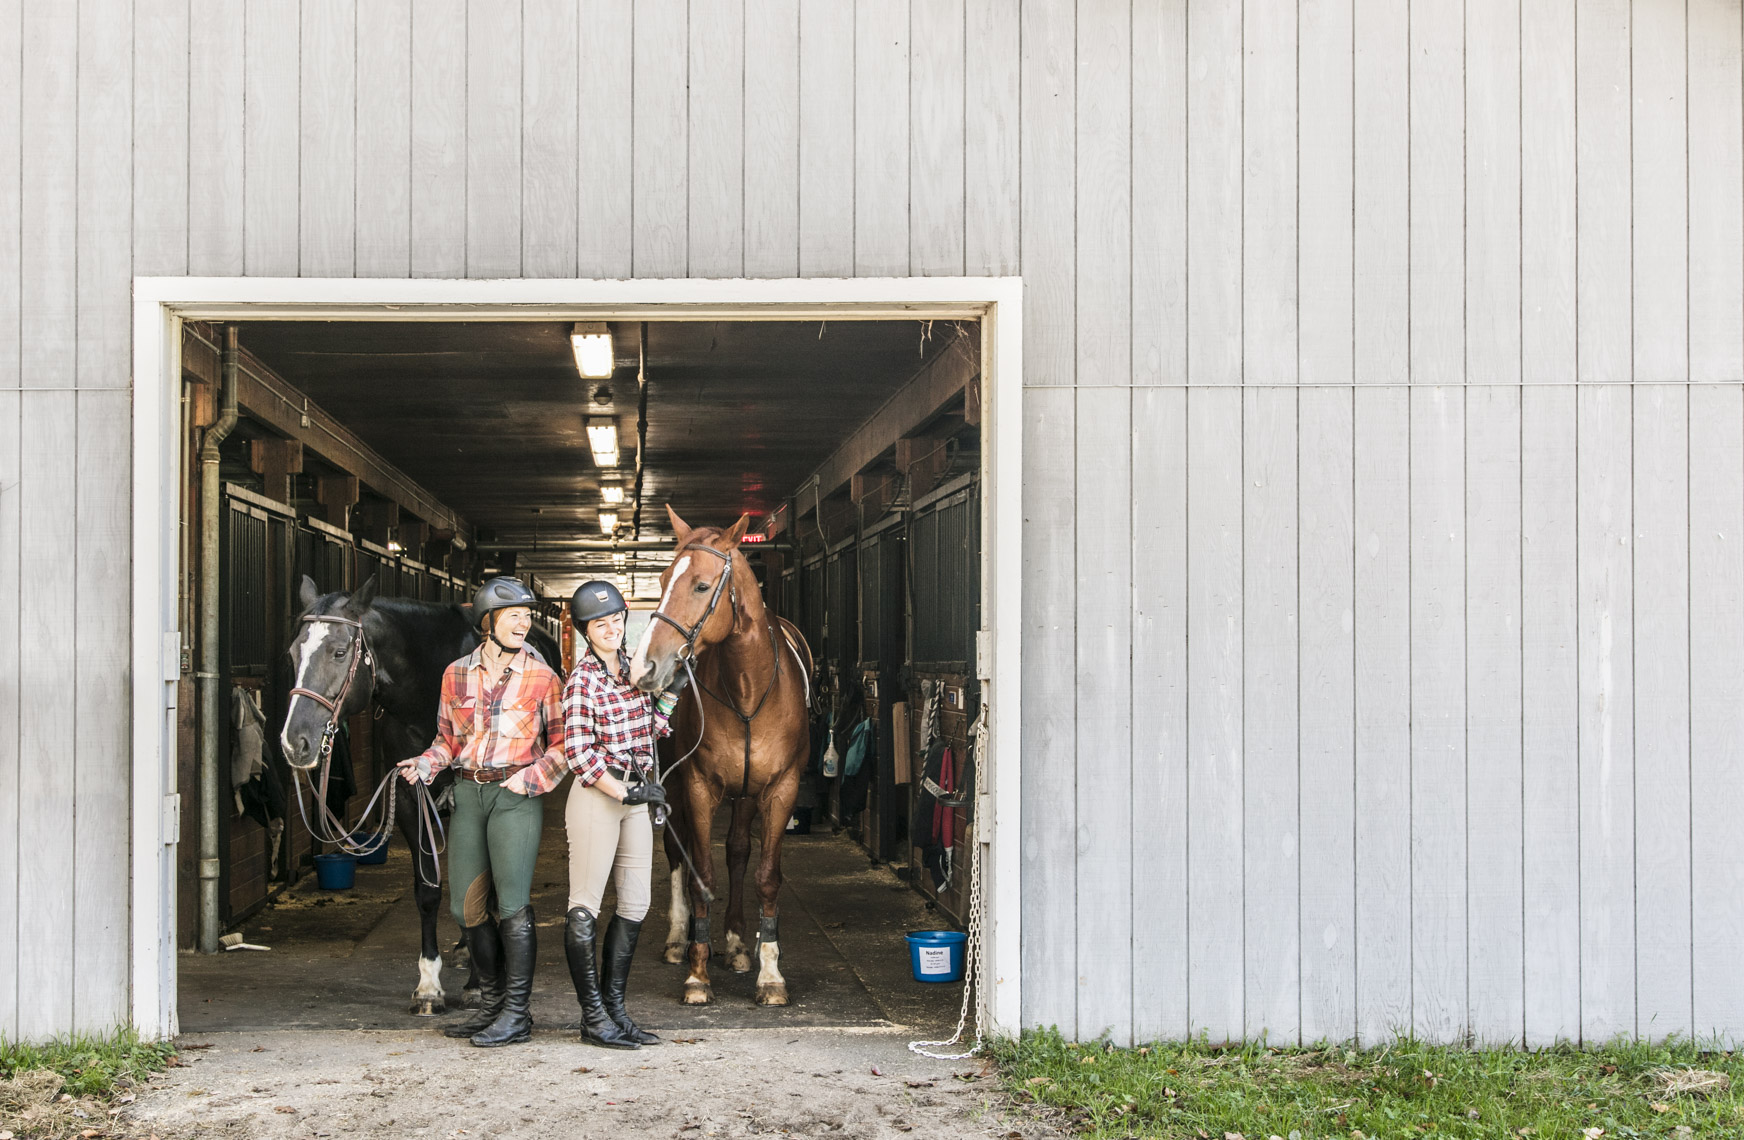 A portrait of two college equestrian athletes at the horse stables in a photo by Ryan Donnell